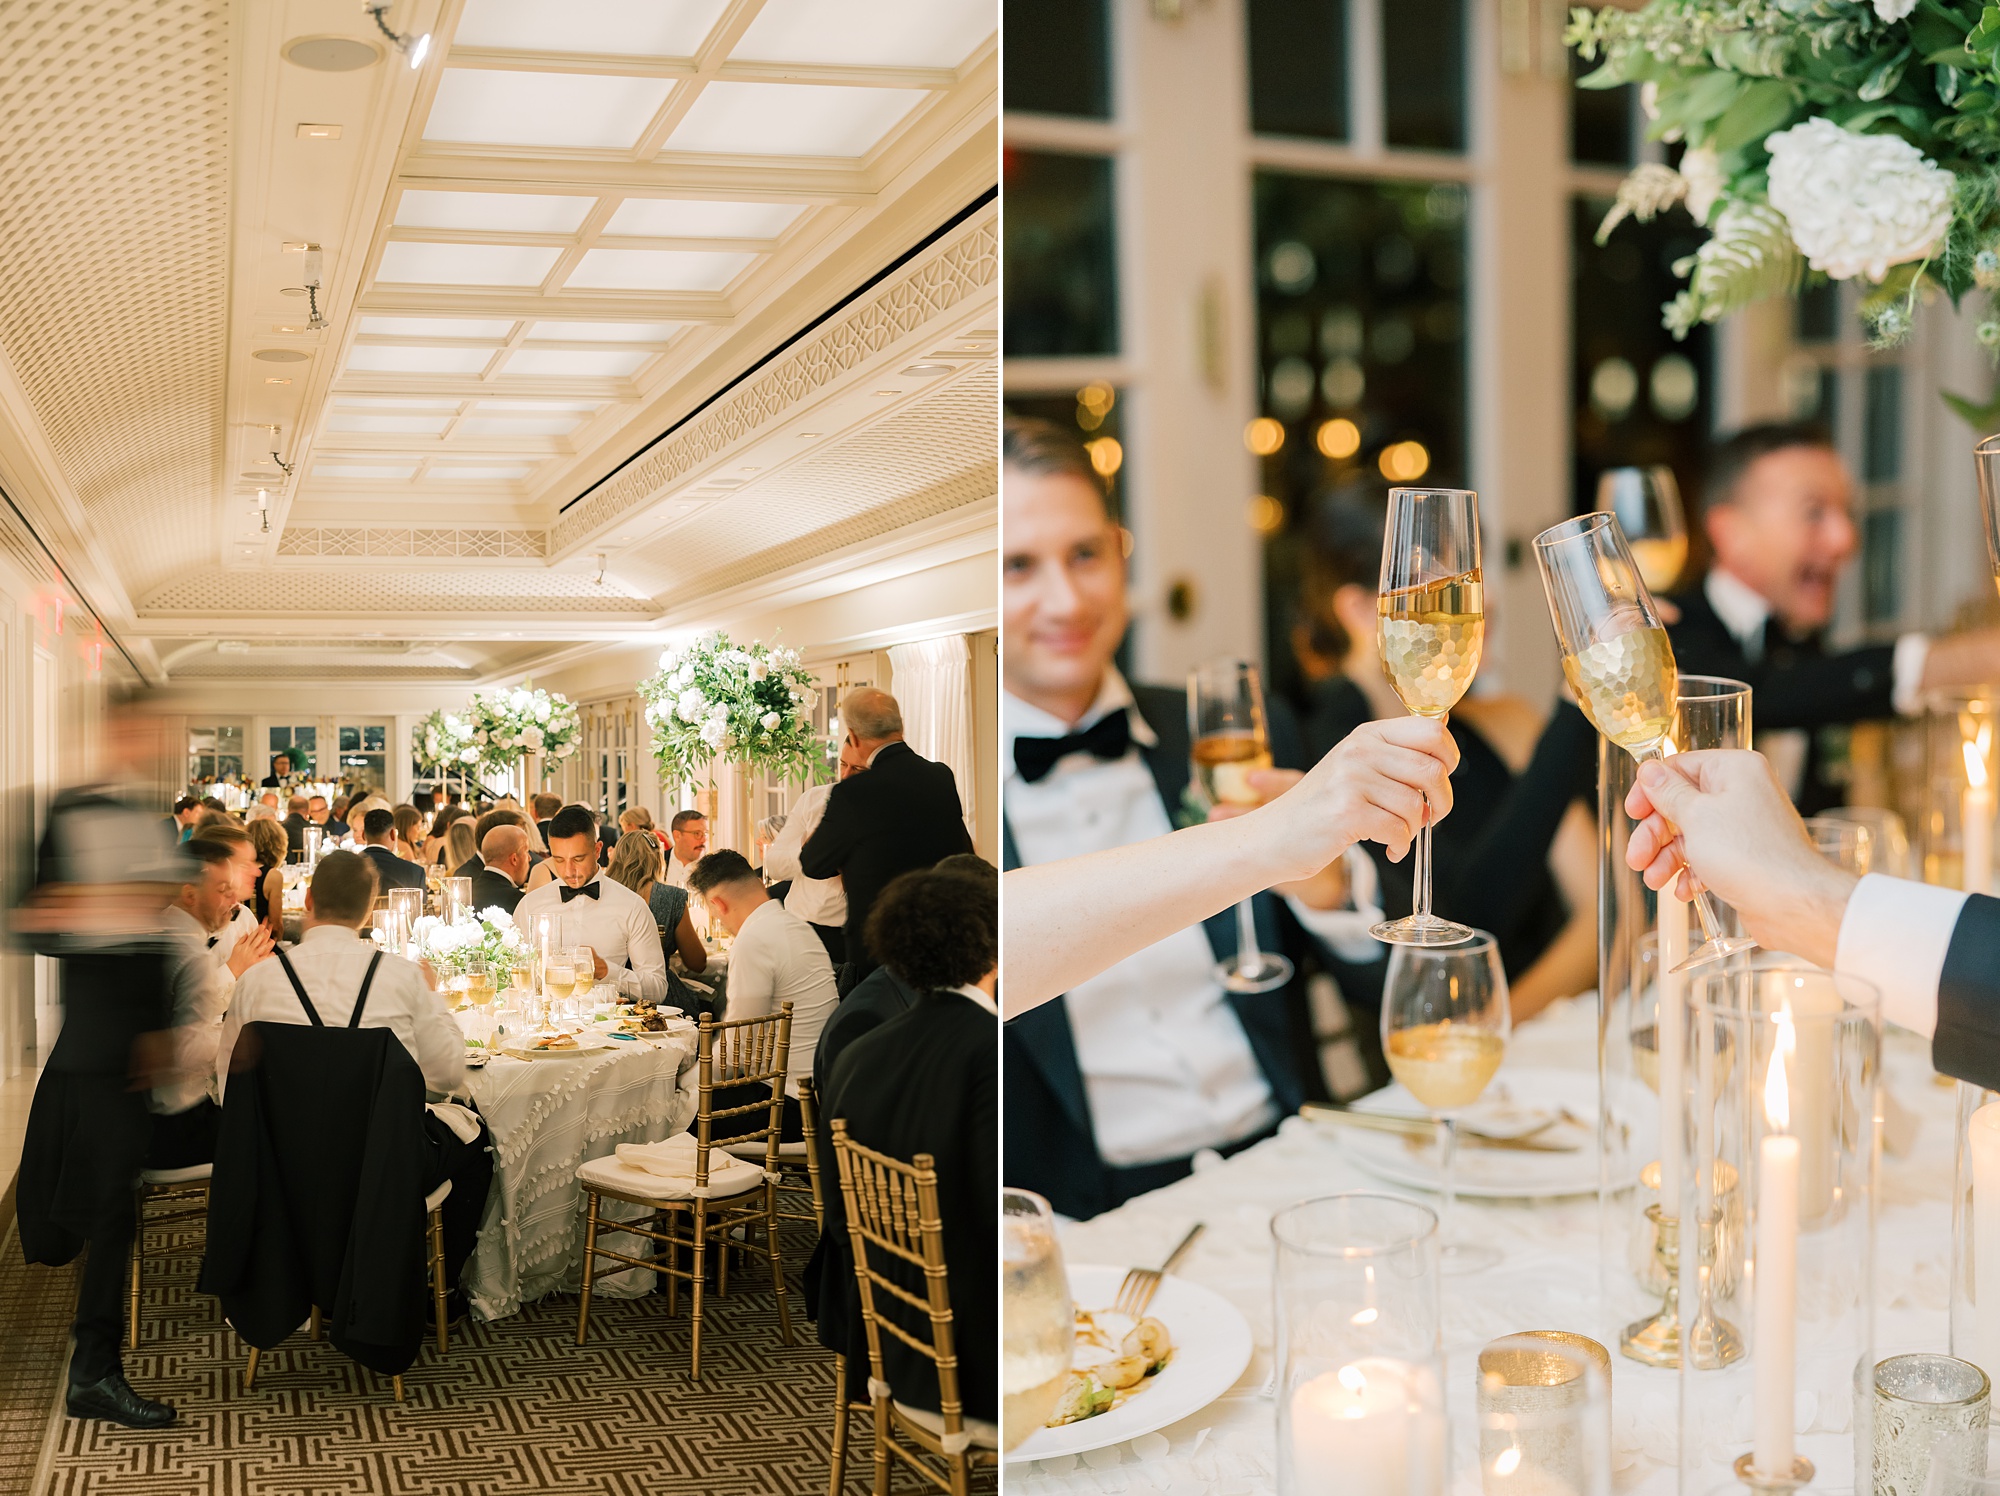 guests toast wine glasses during reception at the Hay Adams Hotel